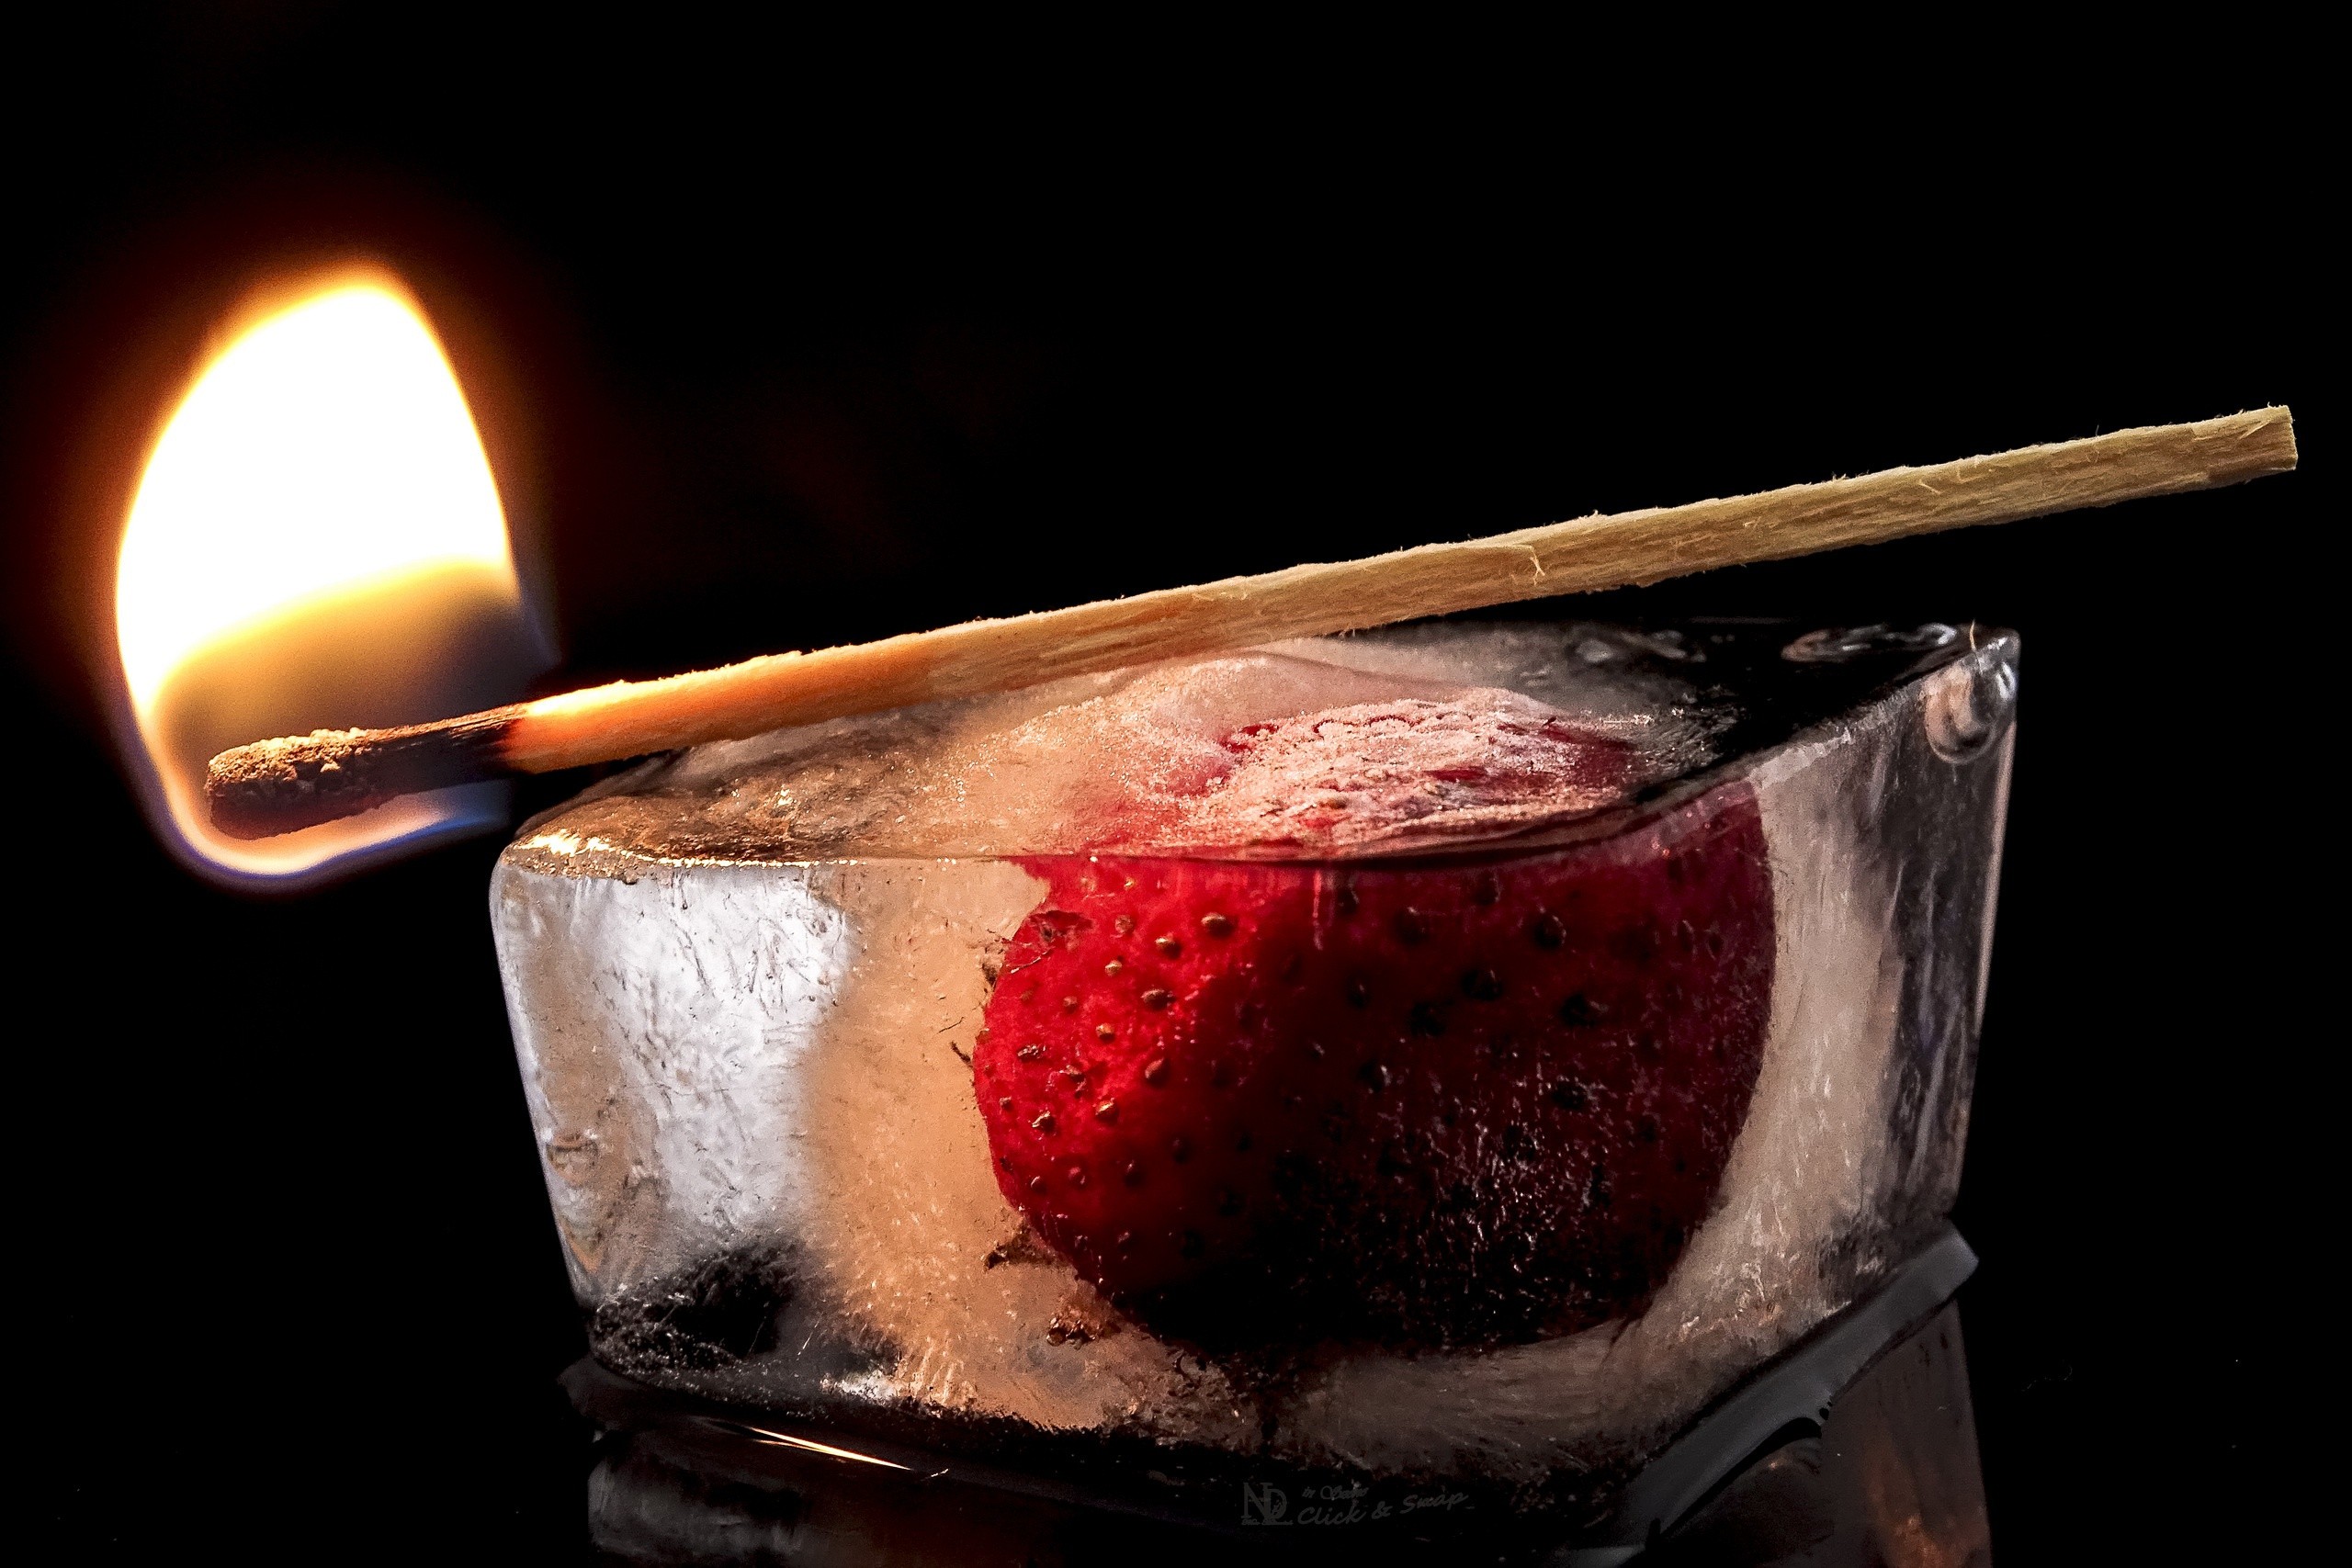 General 2560x1707 fire matches fruit strawberries ice closeup simple background reflection